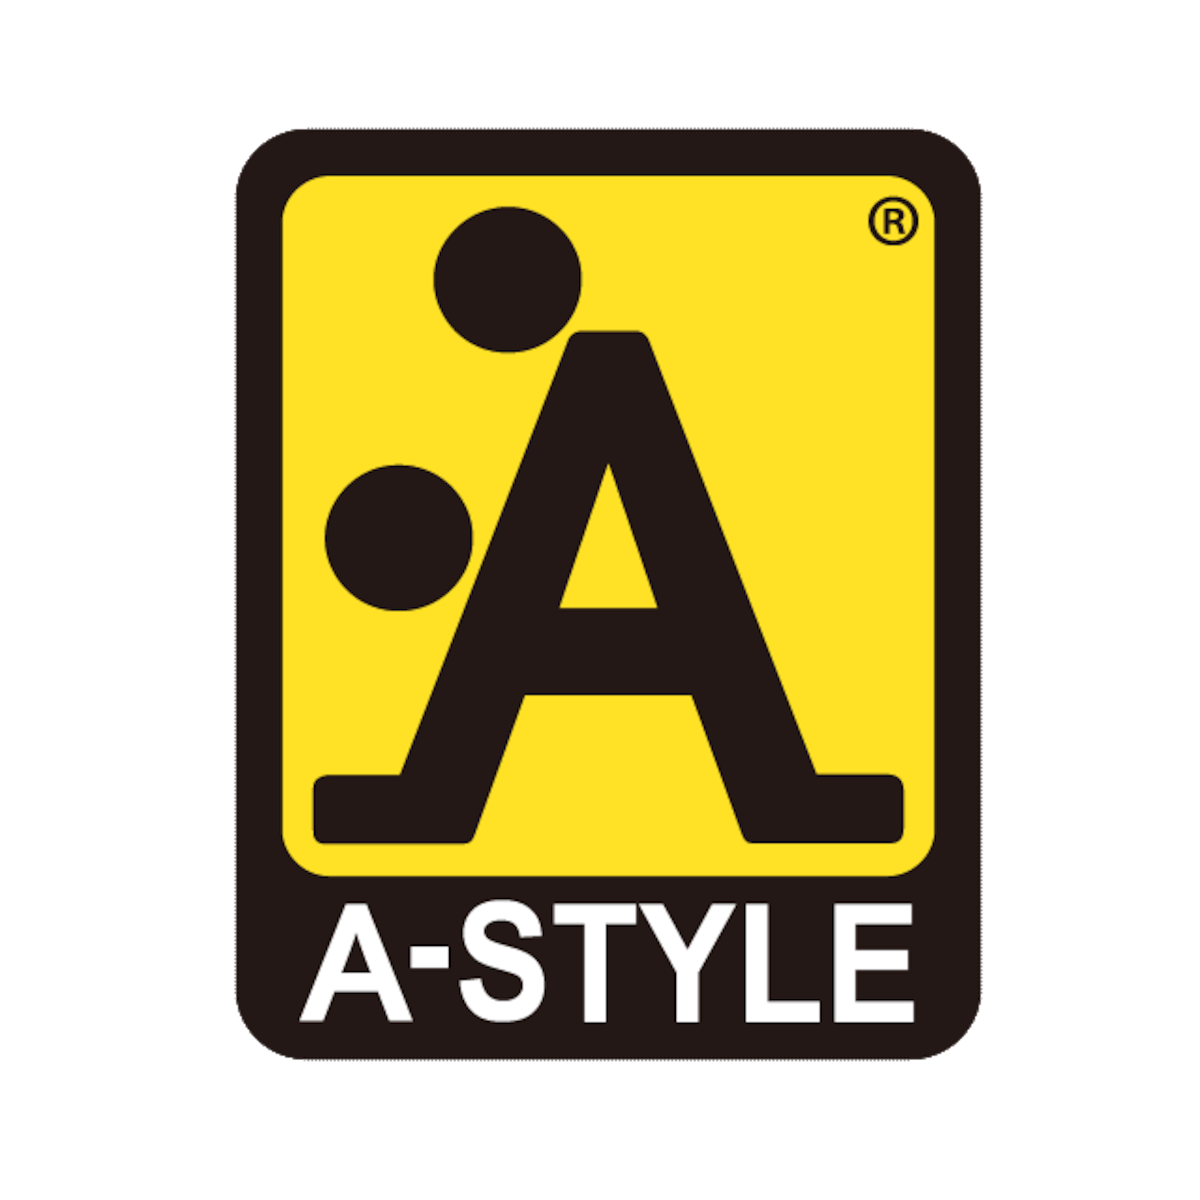 A-STYLE powered by BASE